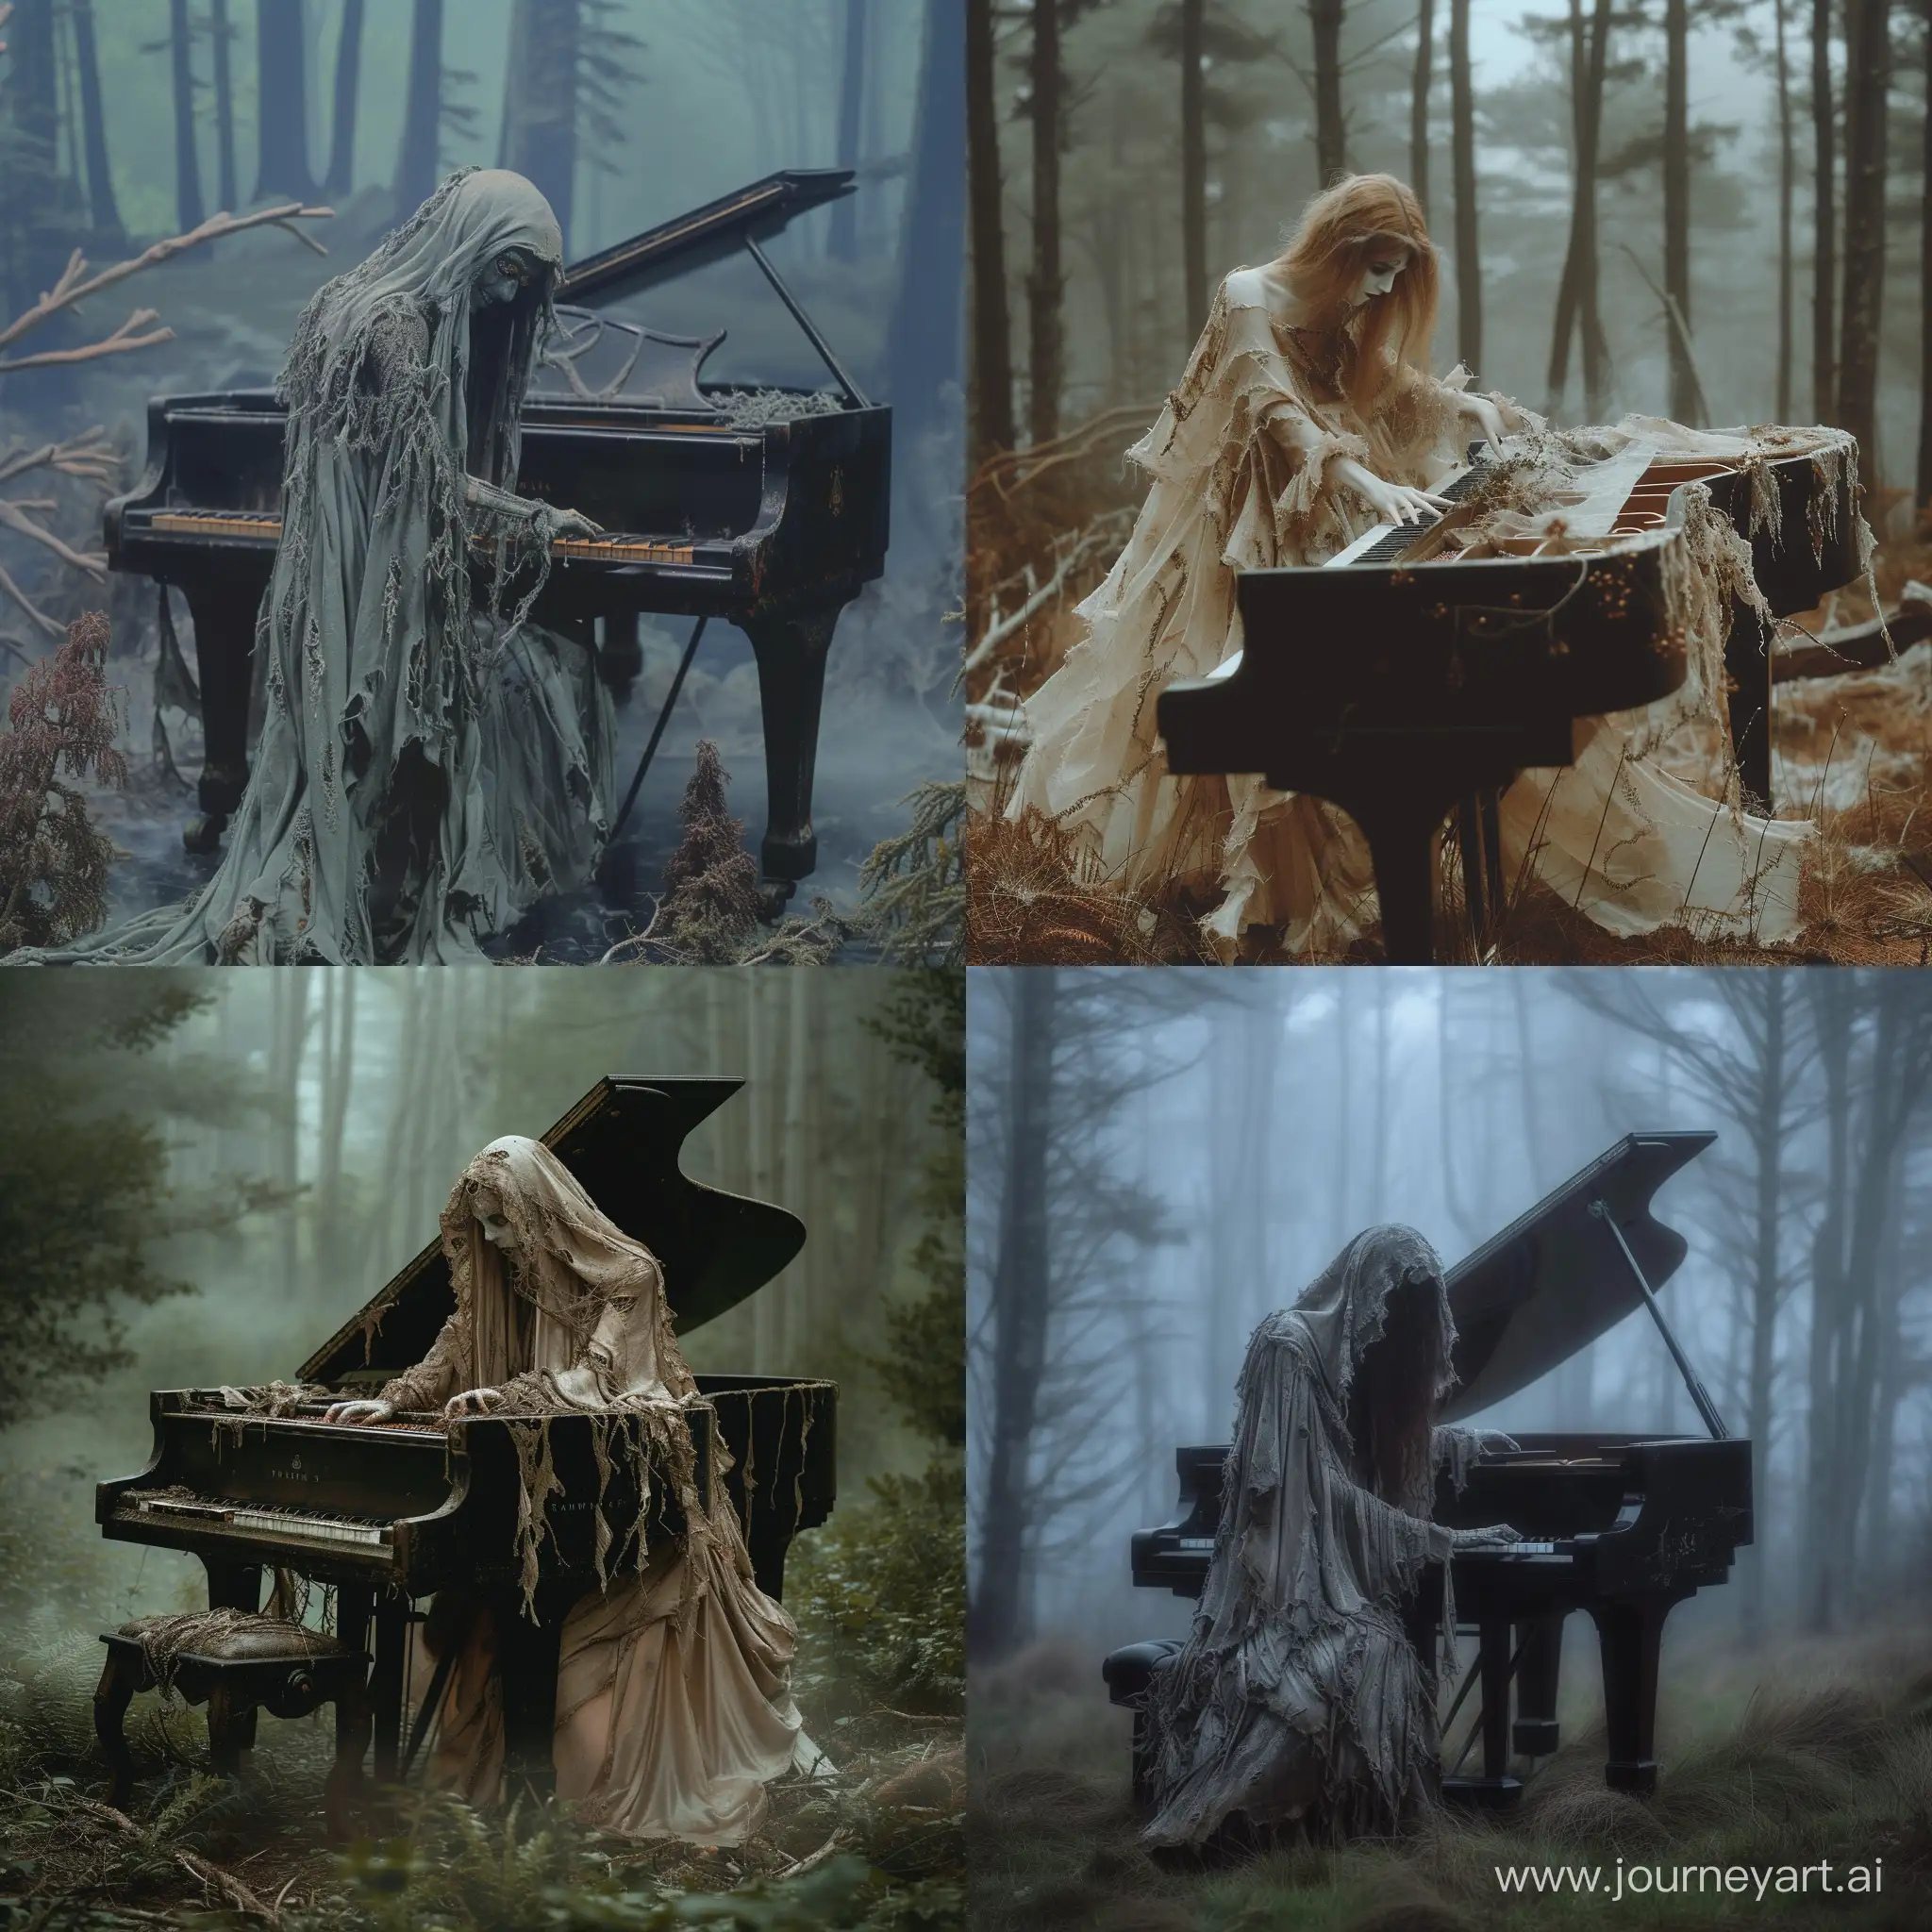 Enchanting-Ghostly-Pianist-Serenades-in-Mysterious-Misty-Forest